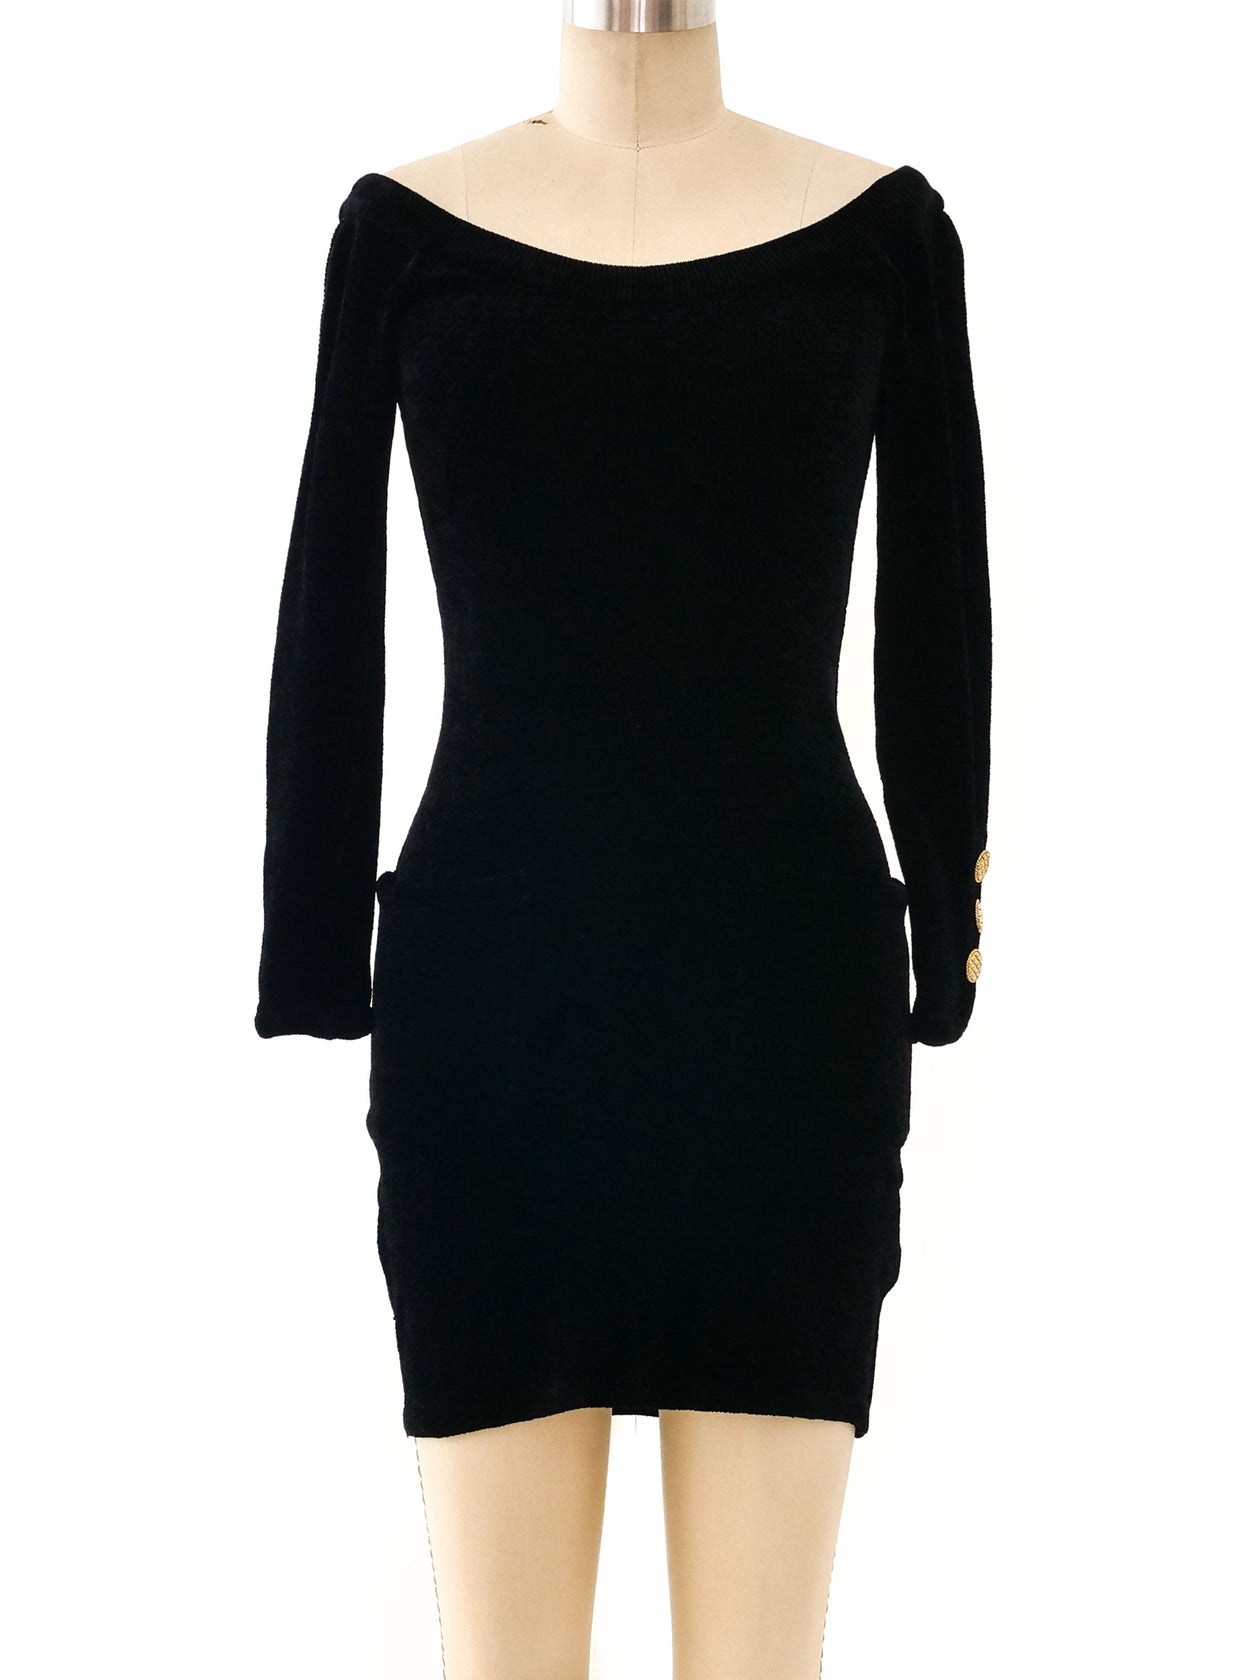 Get the best deals on CHANEL Bodycon Dresses for Women when you